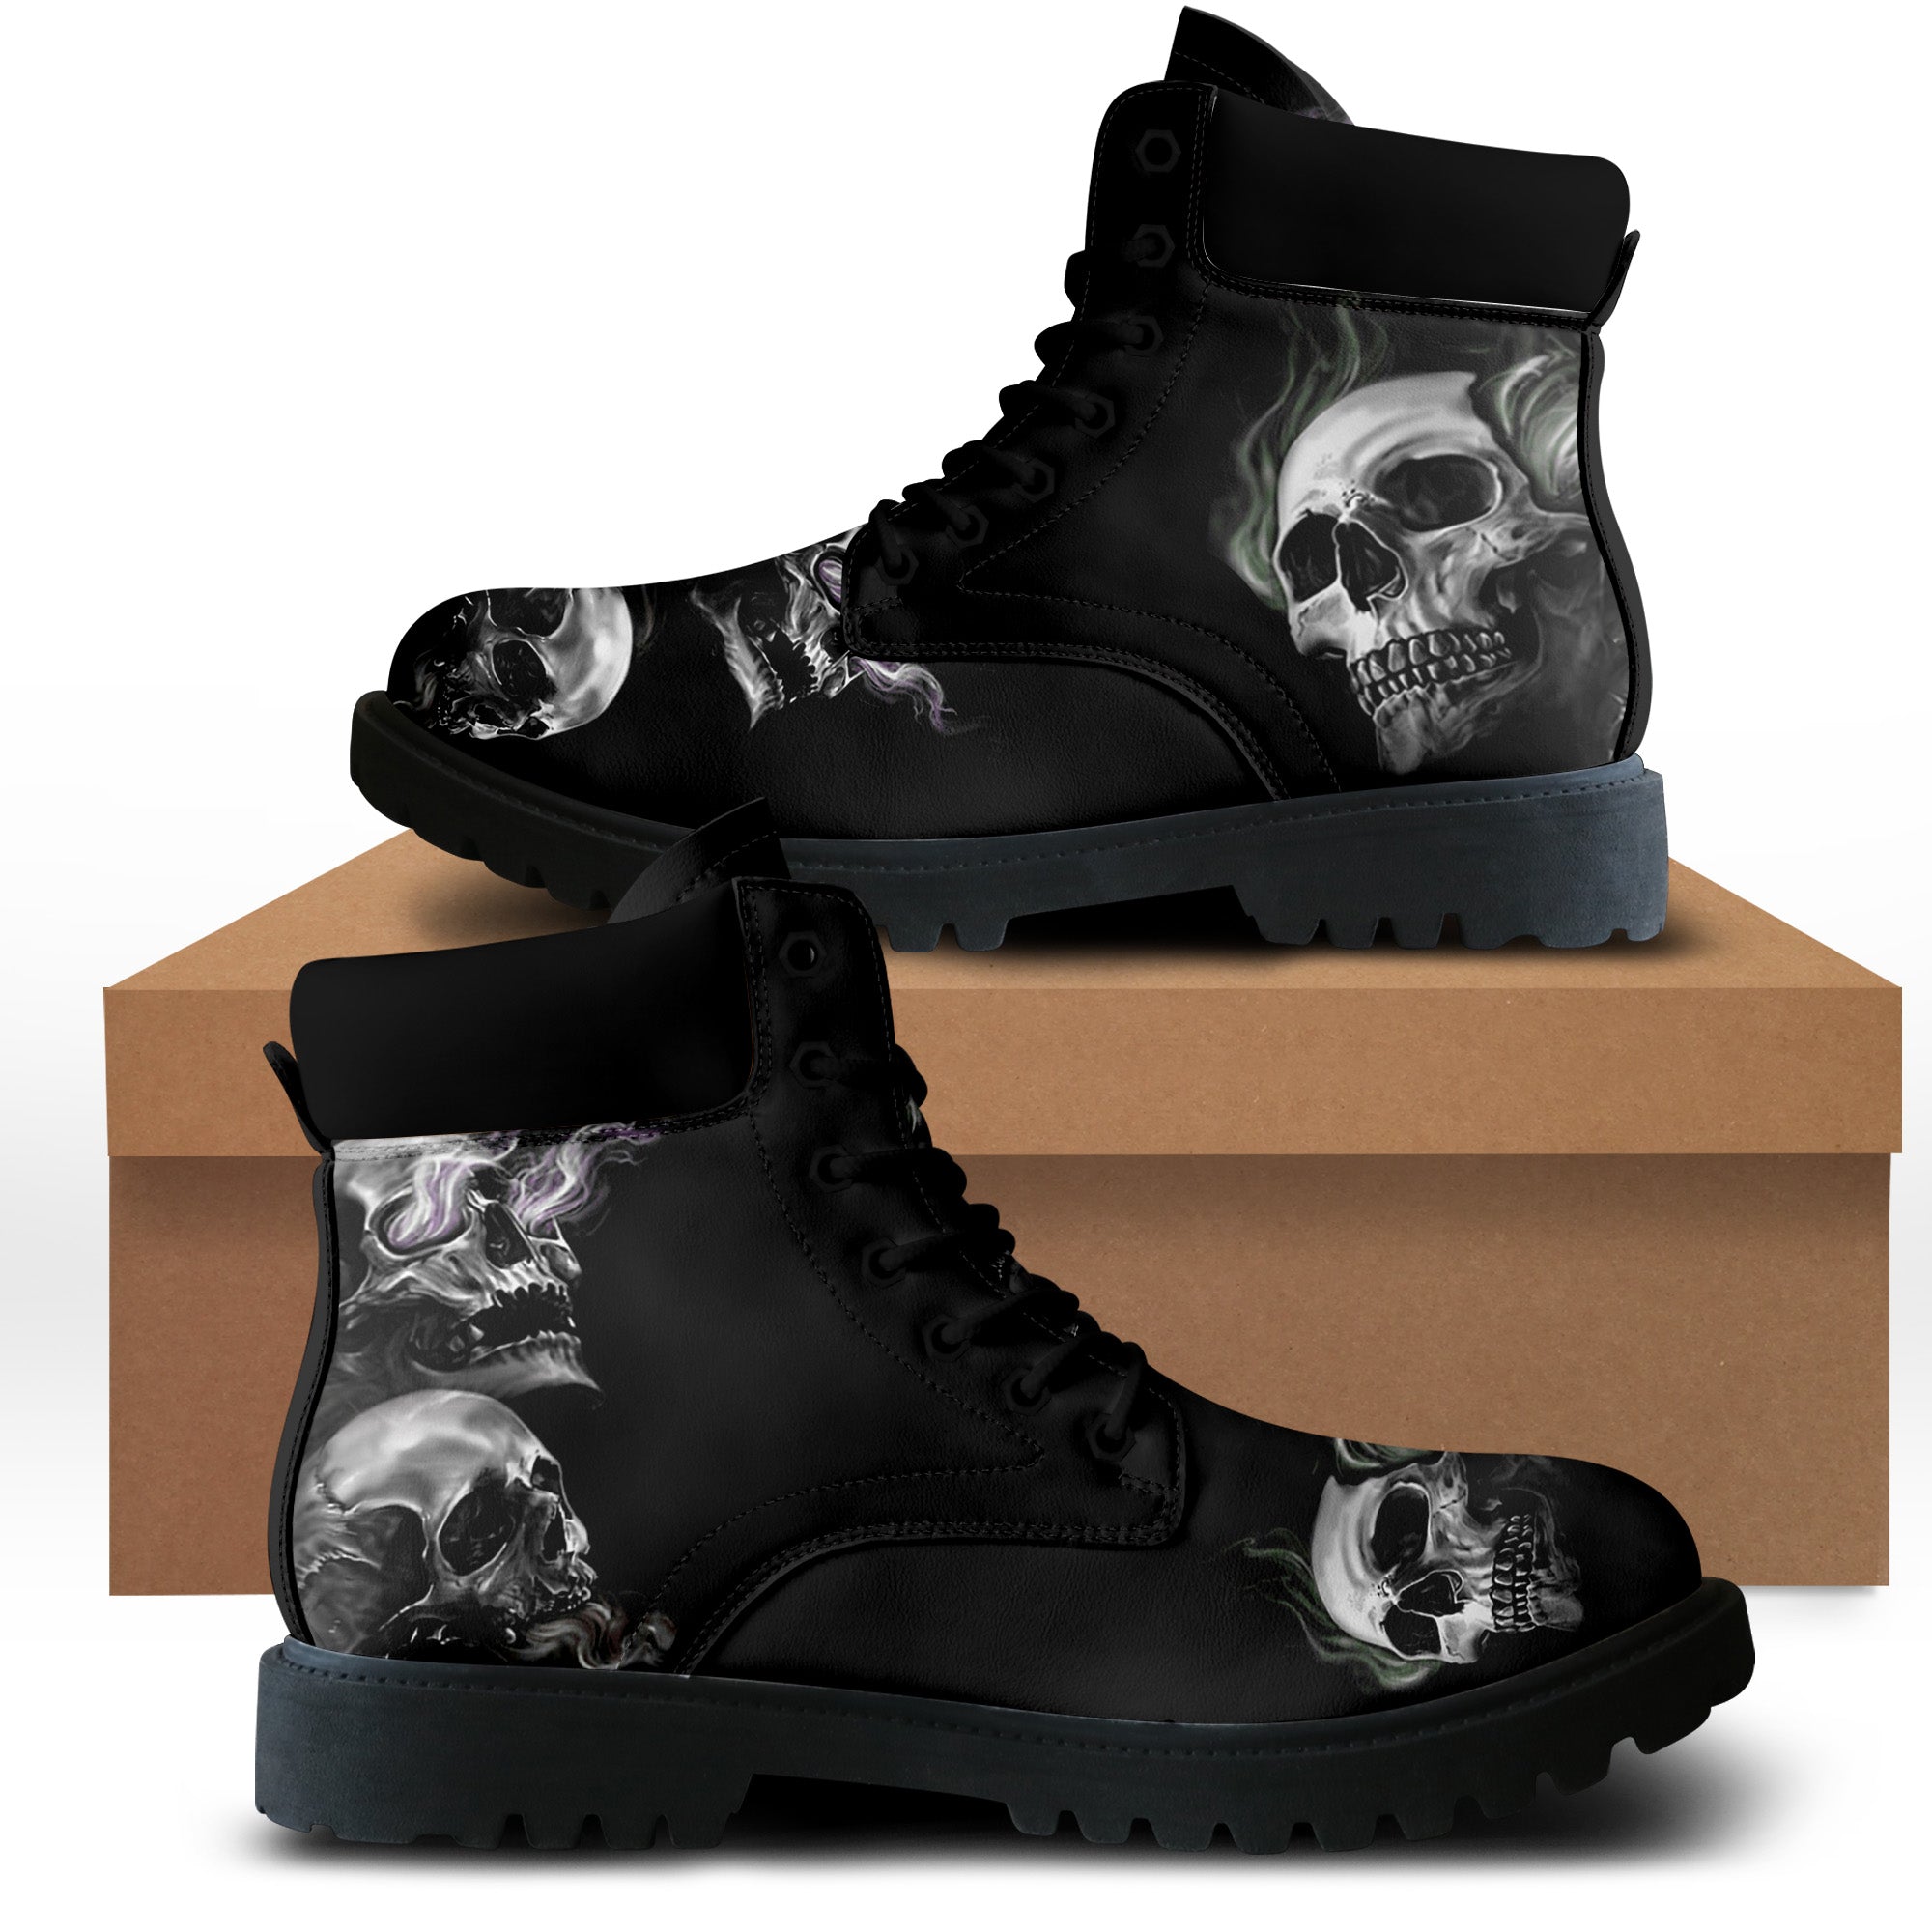 Skull See No Evil All Season Leather Boots